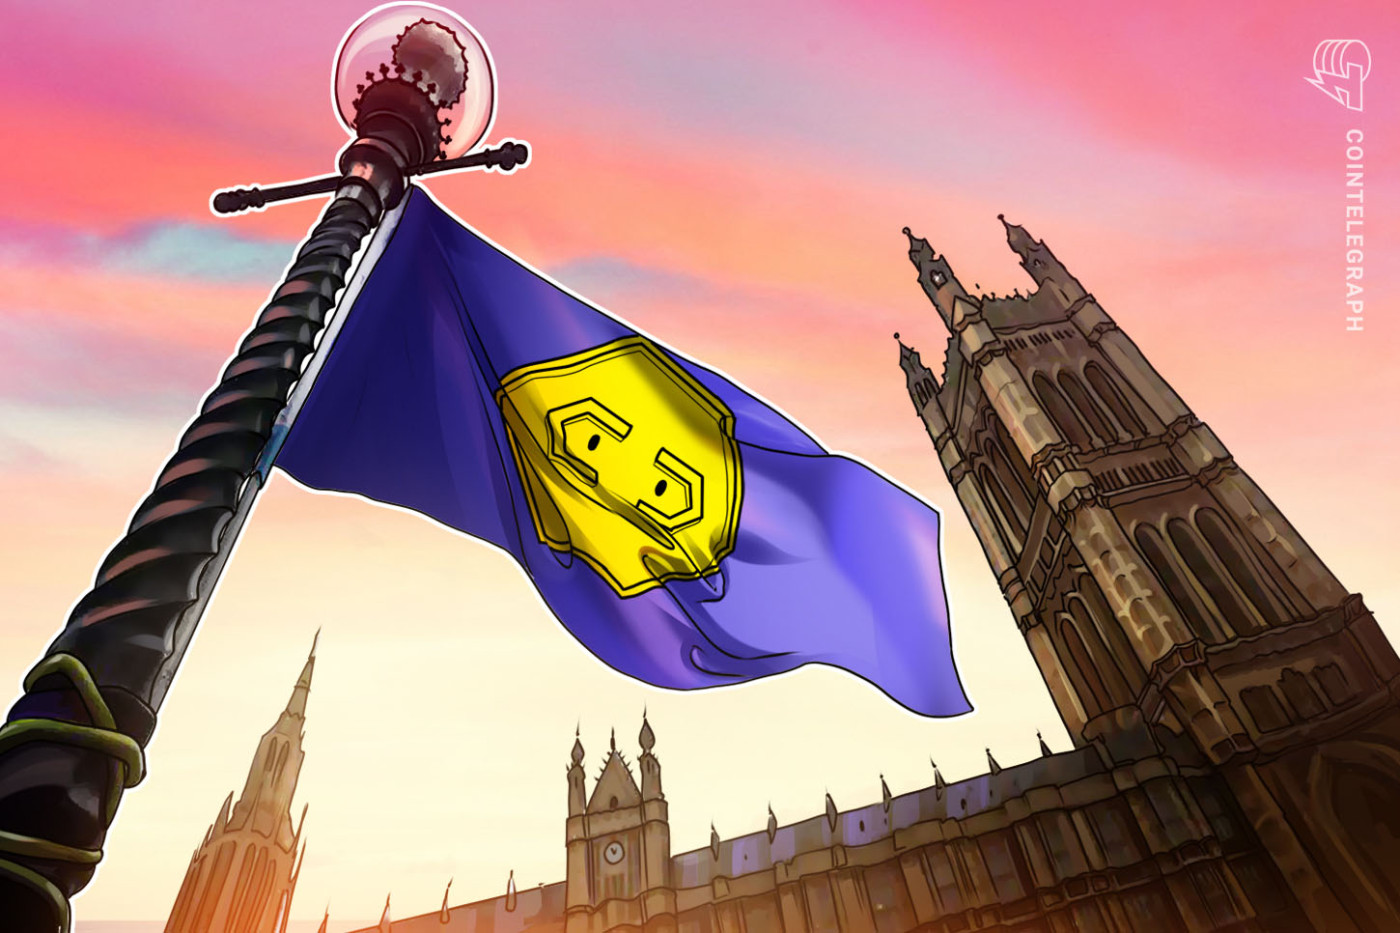 UK Economic Secretary will discuss crypto firms’ access to banks